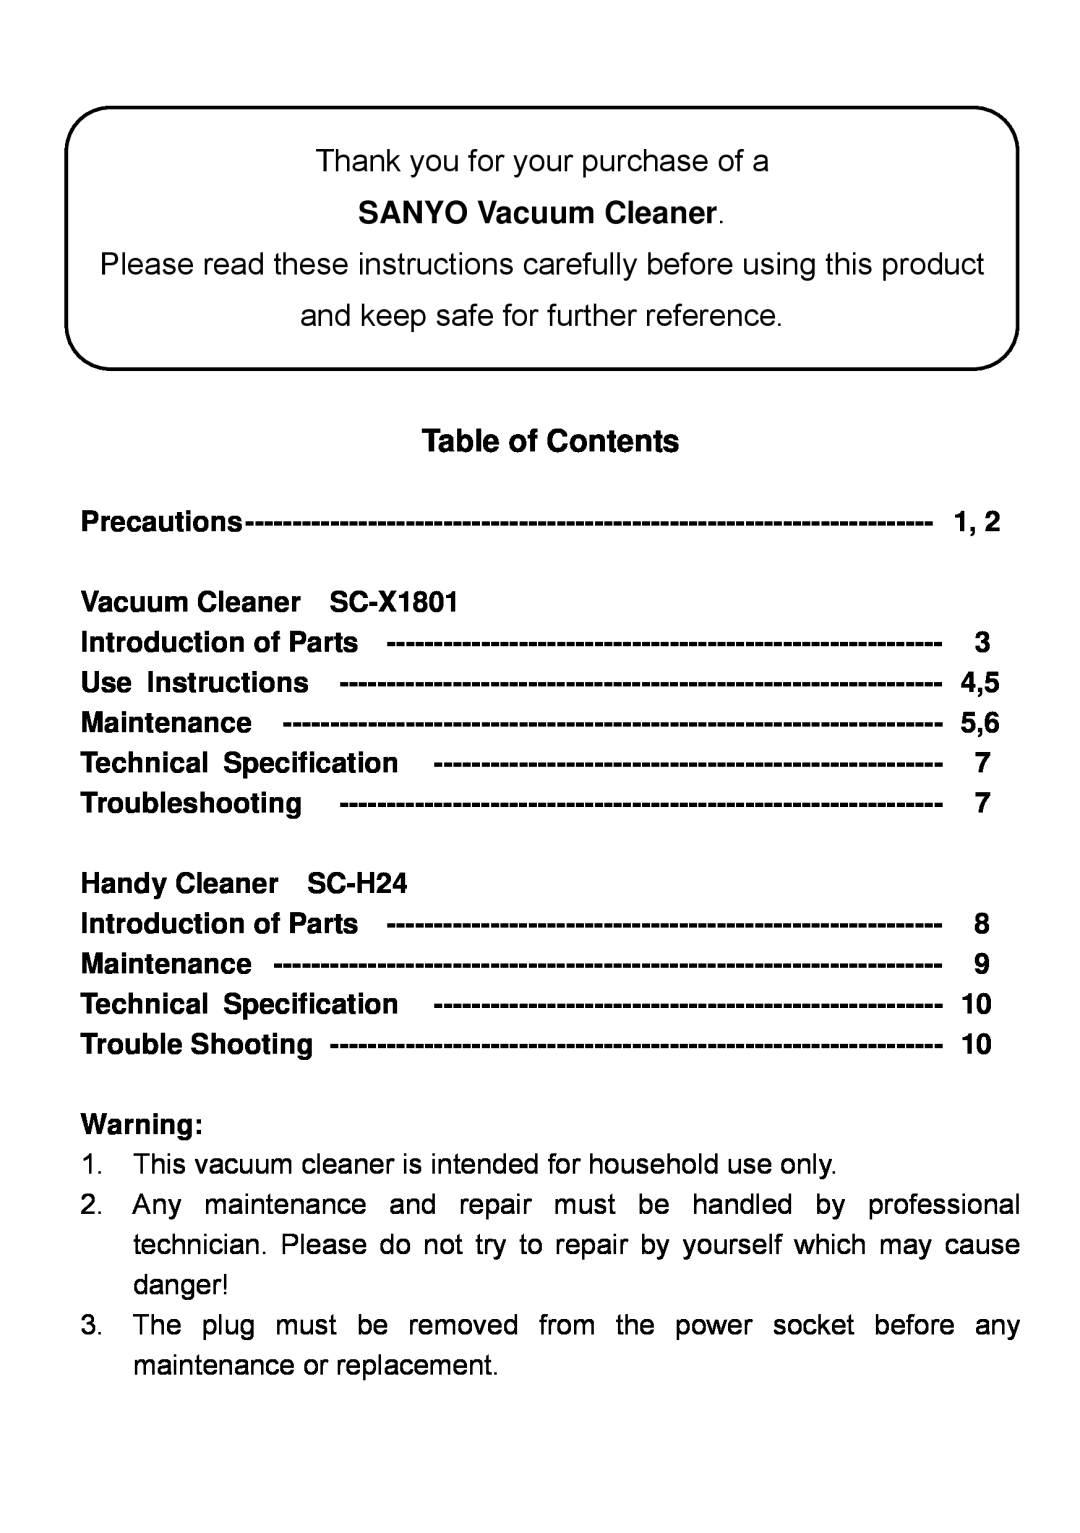 Sanyo SC-X1801R instruction manual SANYO Vacuum Cleaner, Table of Contents, Thank you for your purchase of a 